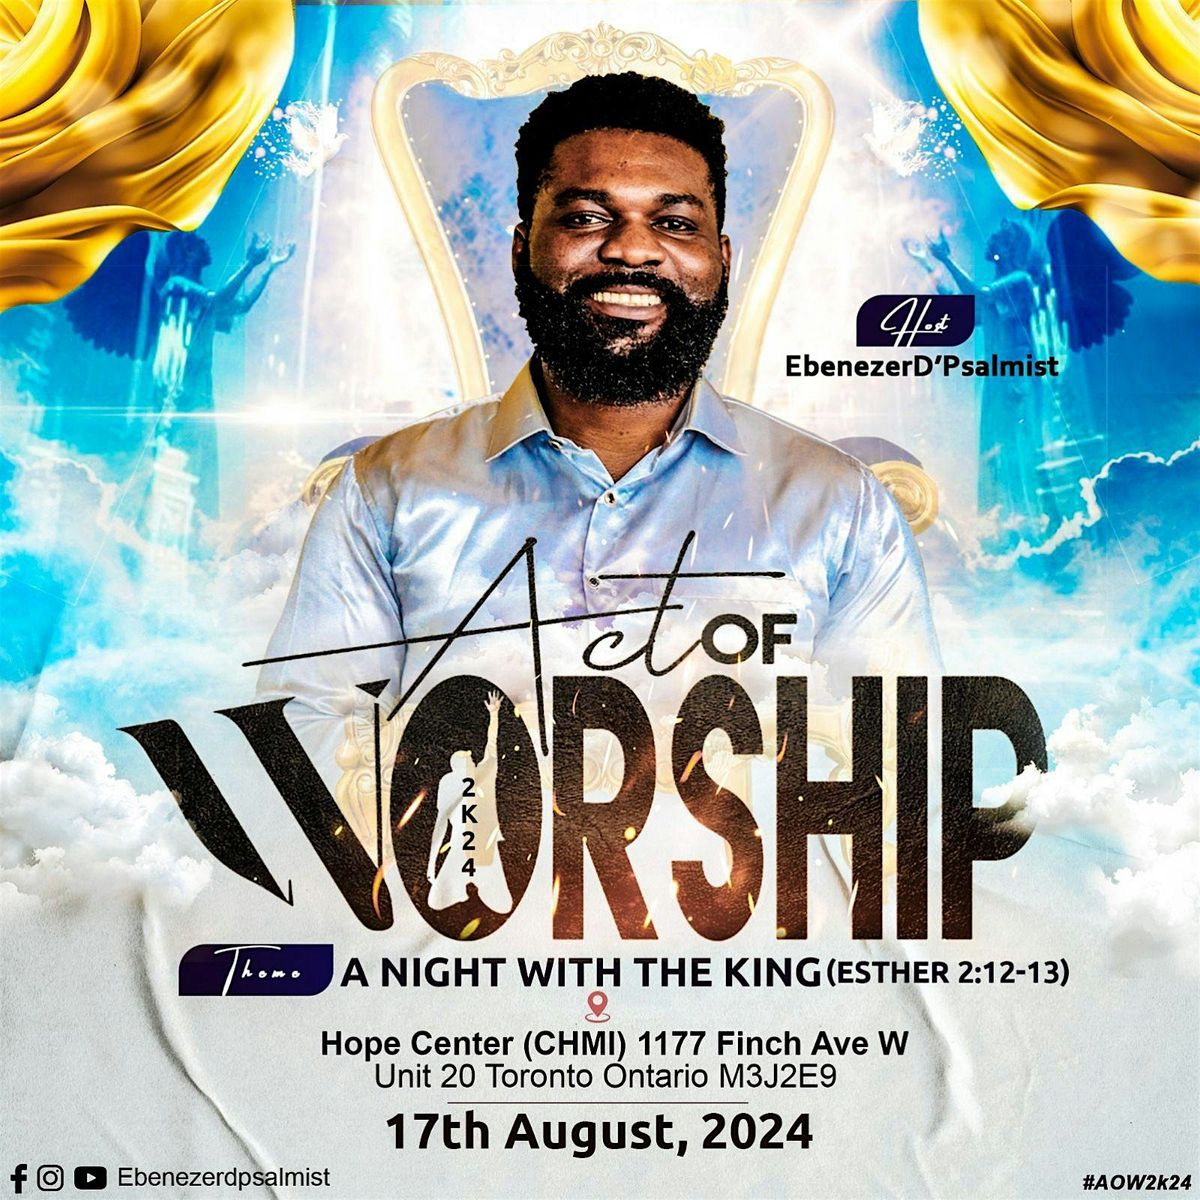 Act Of Worship: A Night With The King